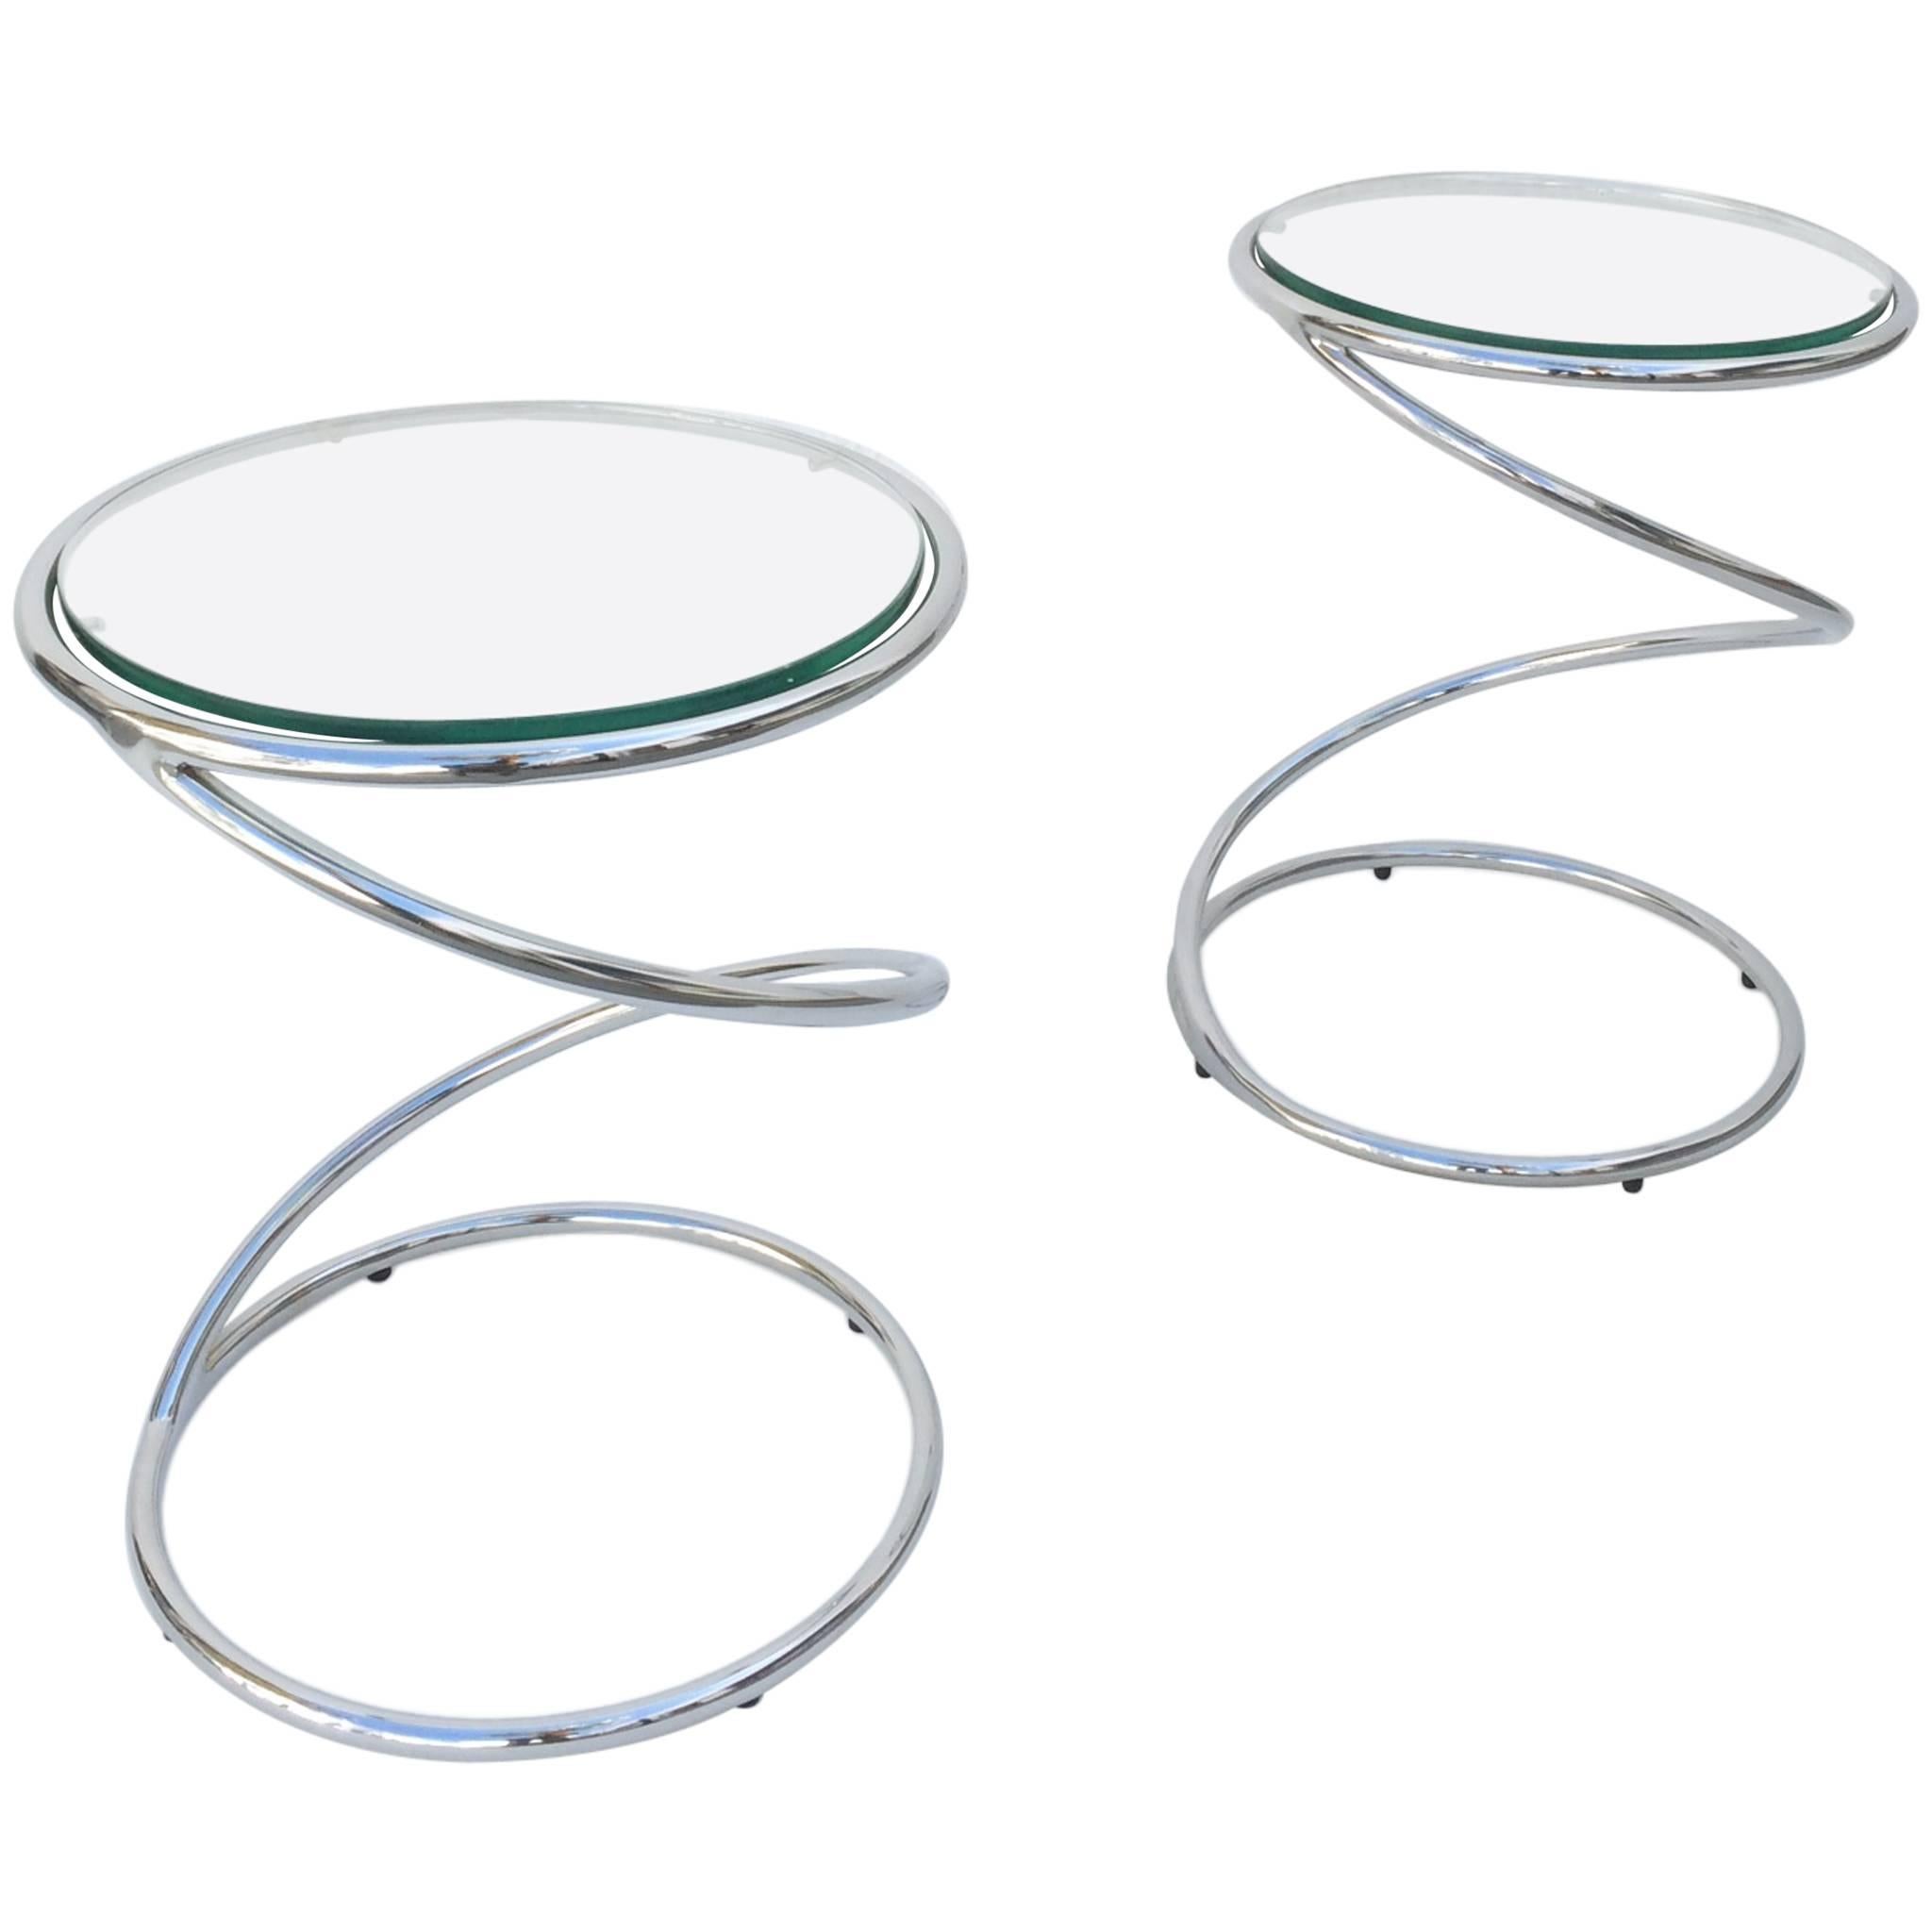 Polished Chrome and Glass Spiral Occasional Tables by Leon Rosen for Pace